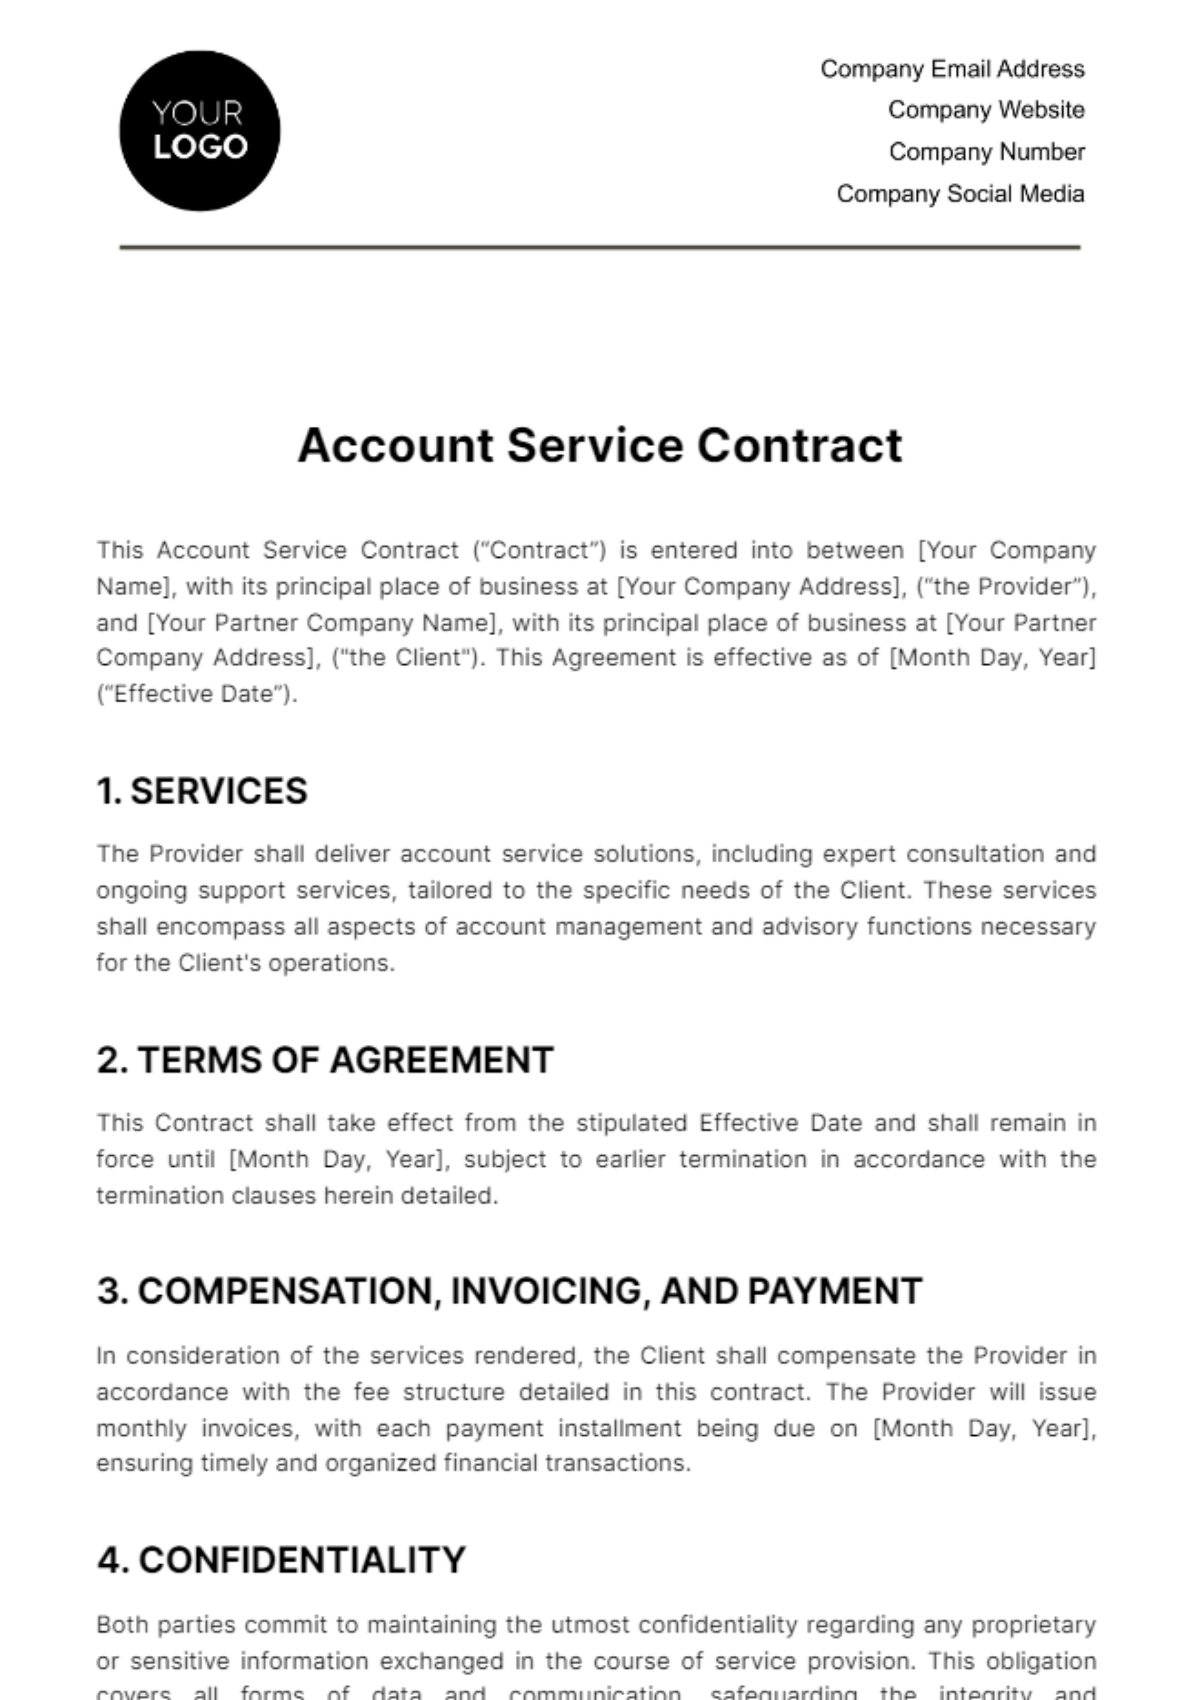 Account Service Contract Template